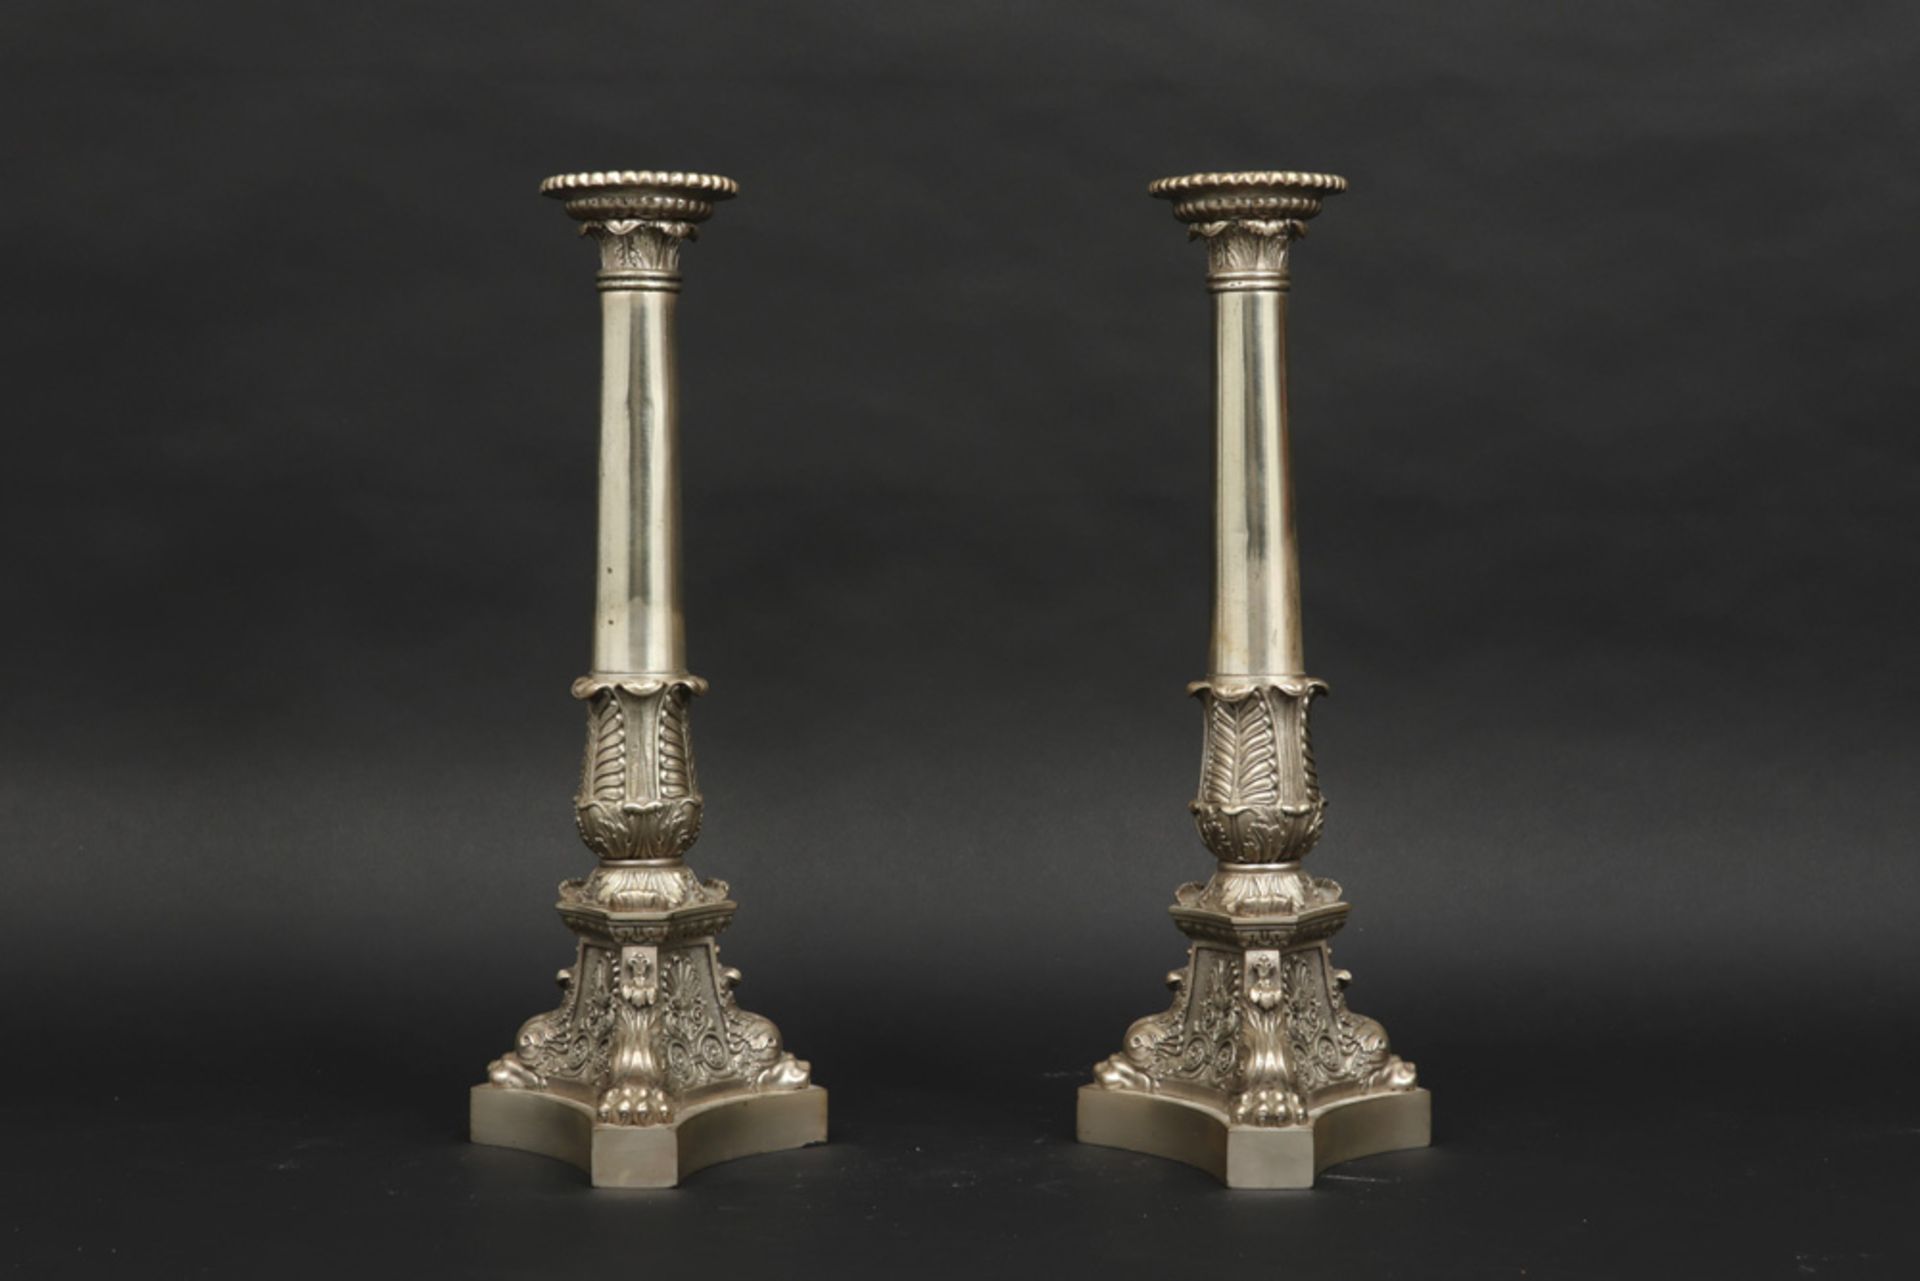 pair of antique Empire style candlesticks in metal - Image 2 of 3